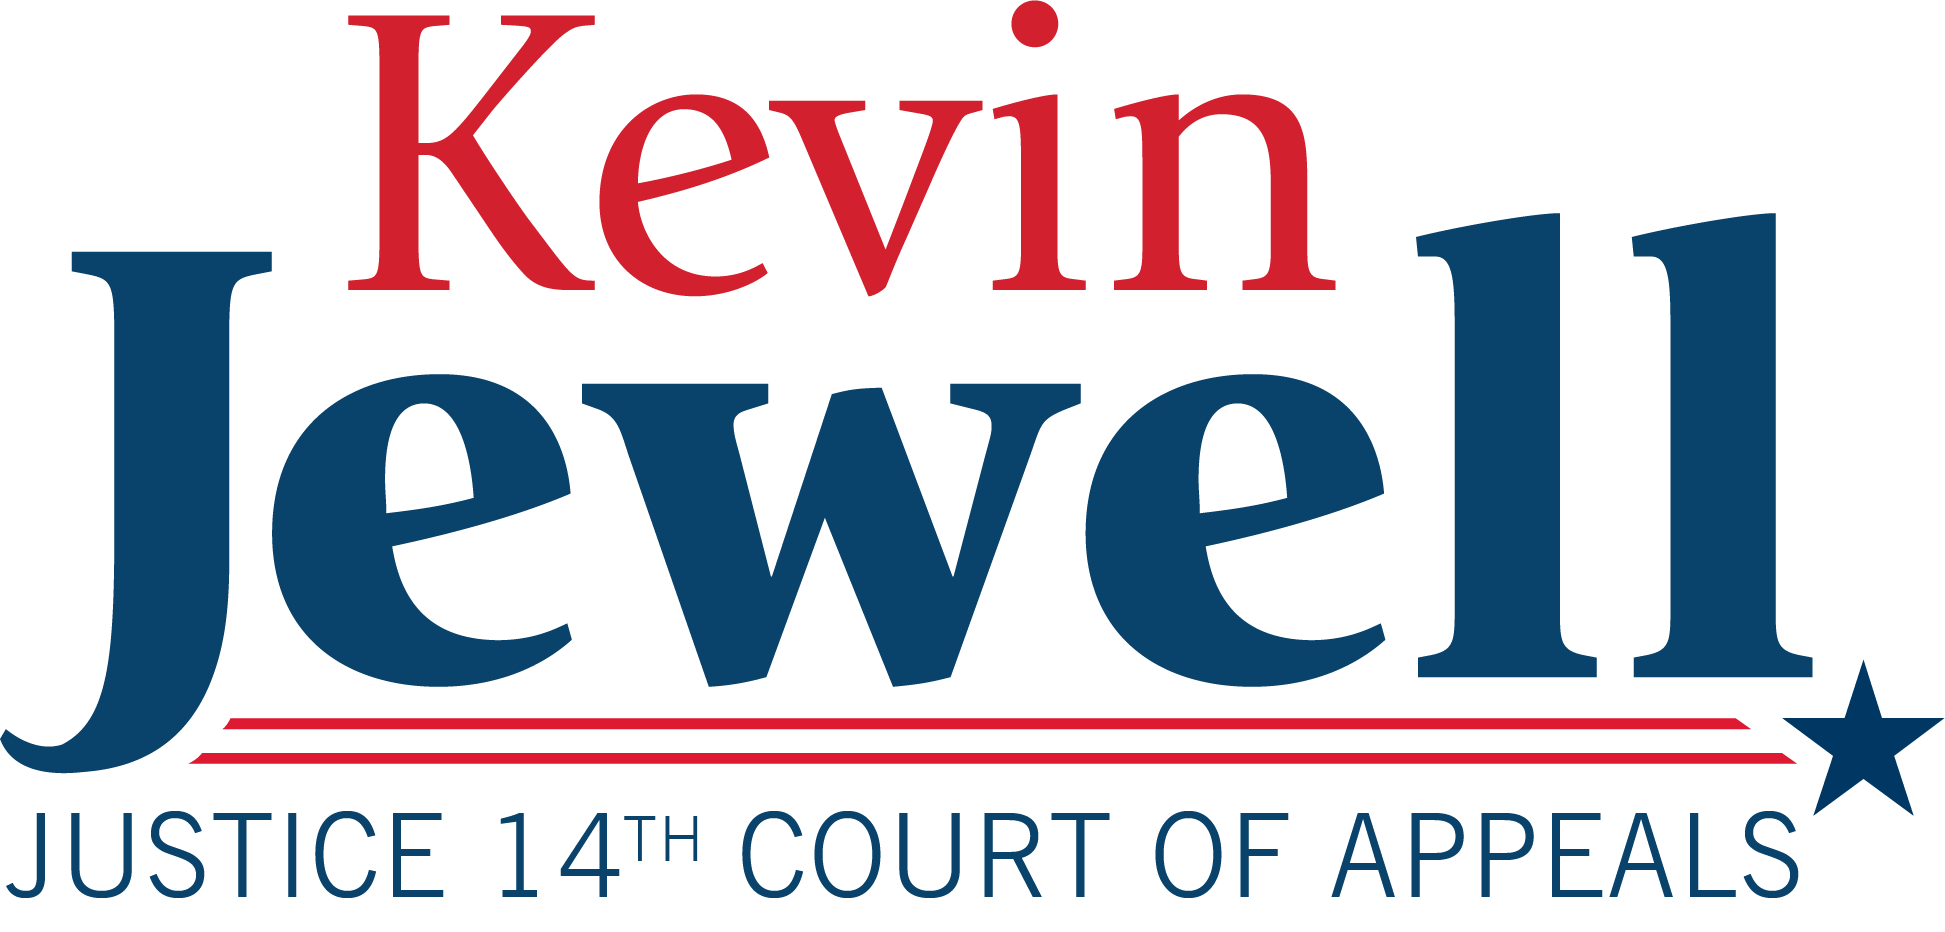 Justice Kevin Jewell